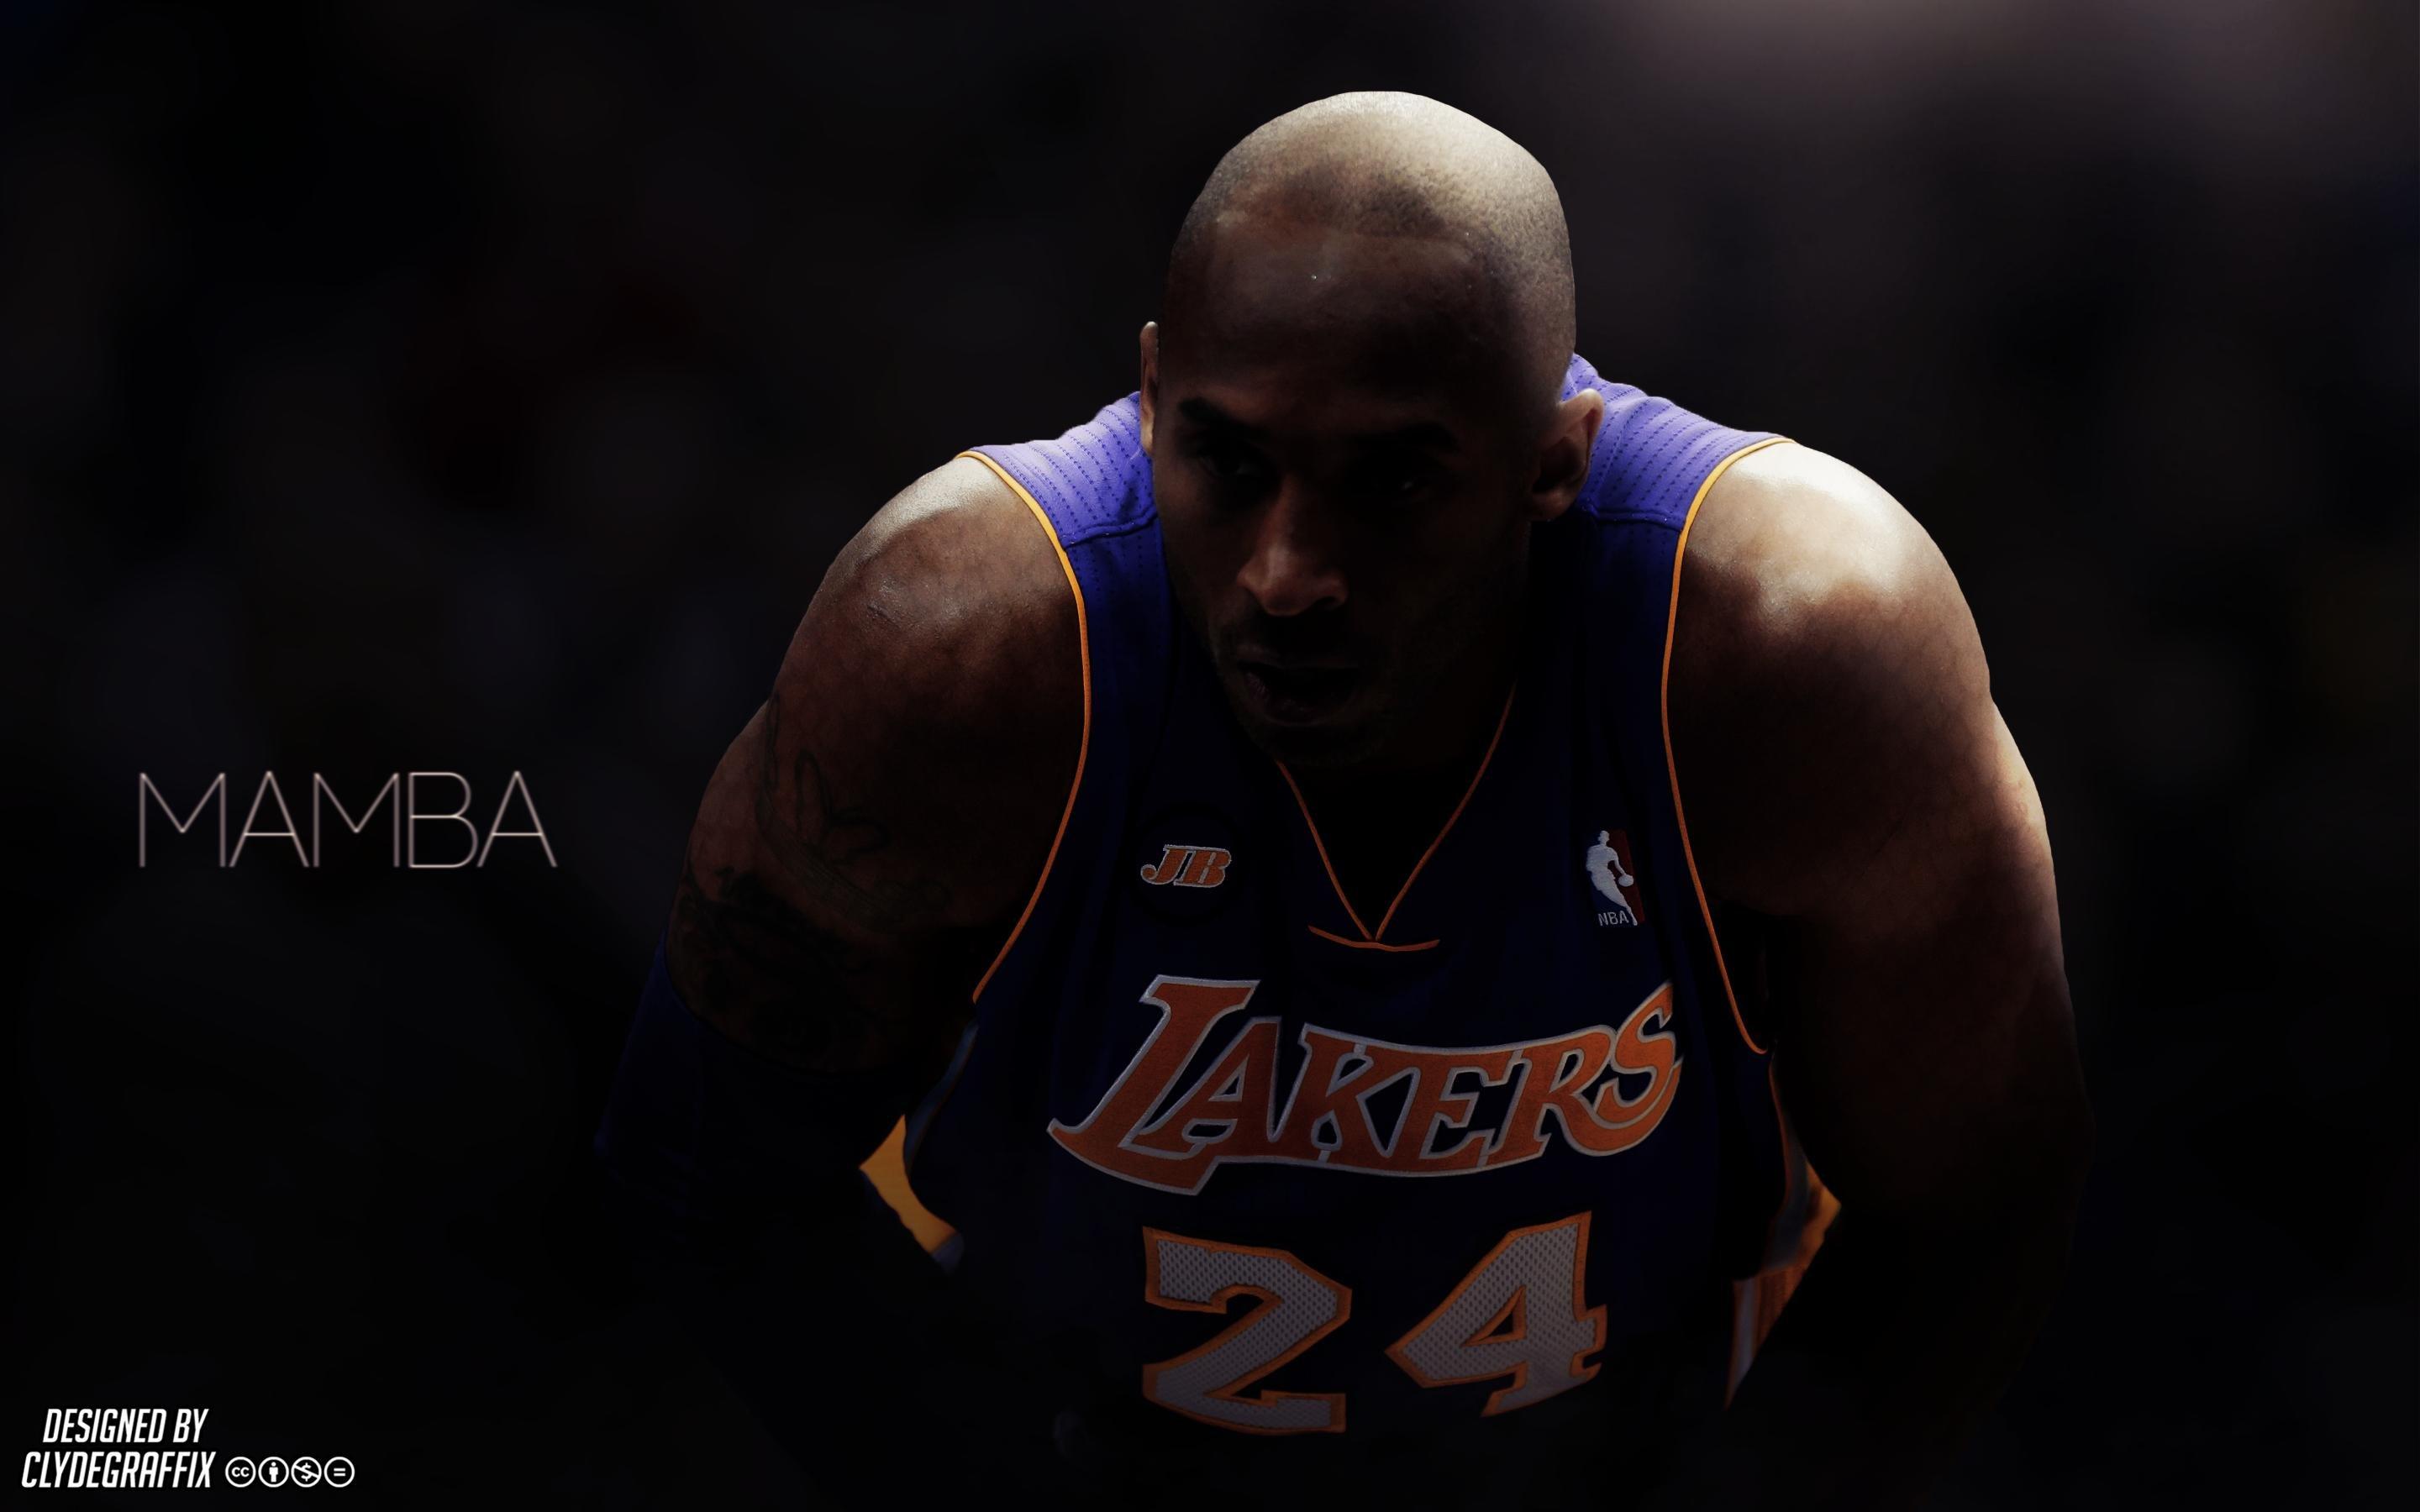 Made a simple Kobe wallpaper. Thought maybe some people